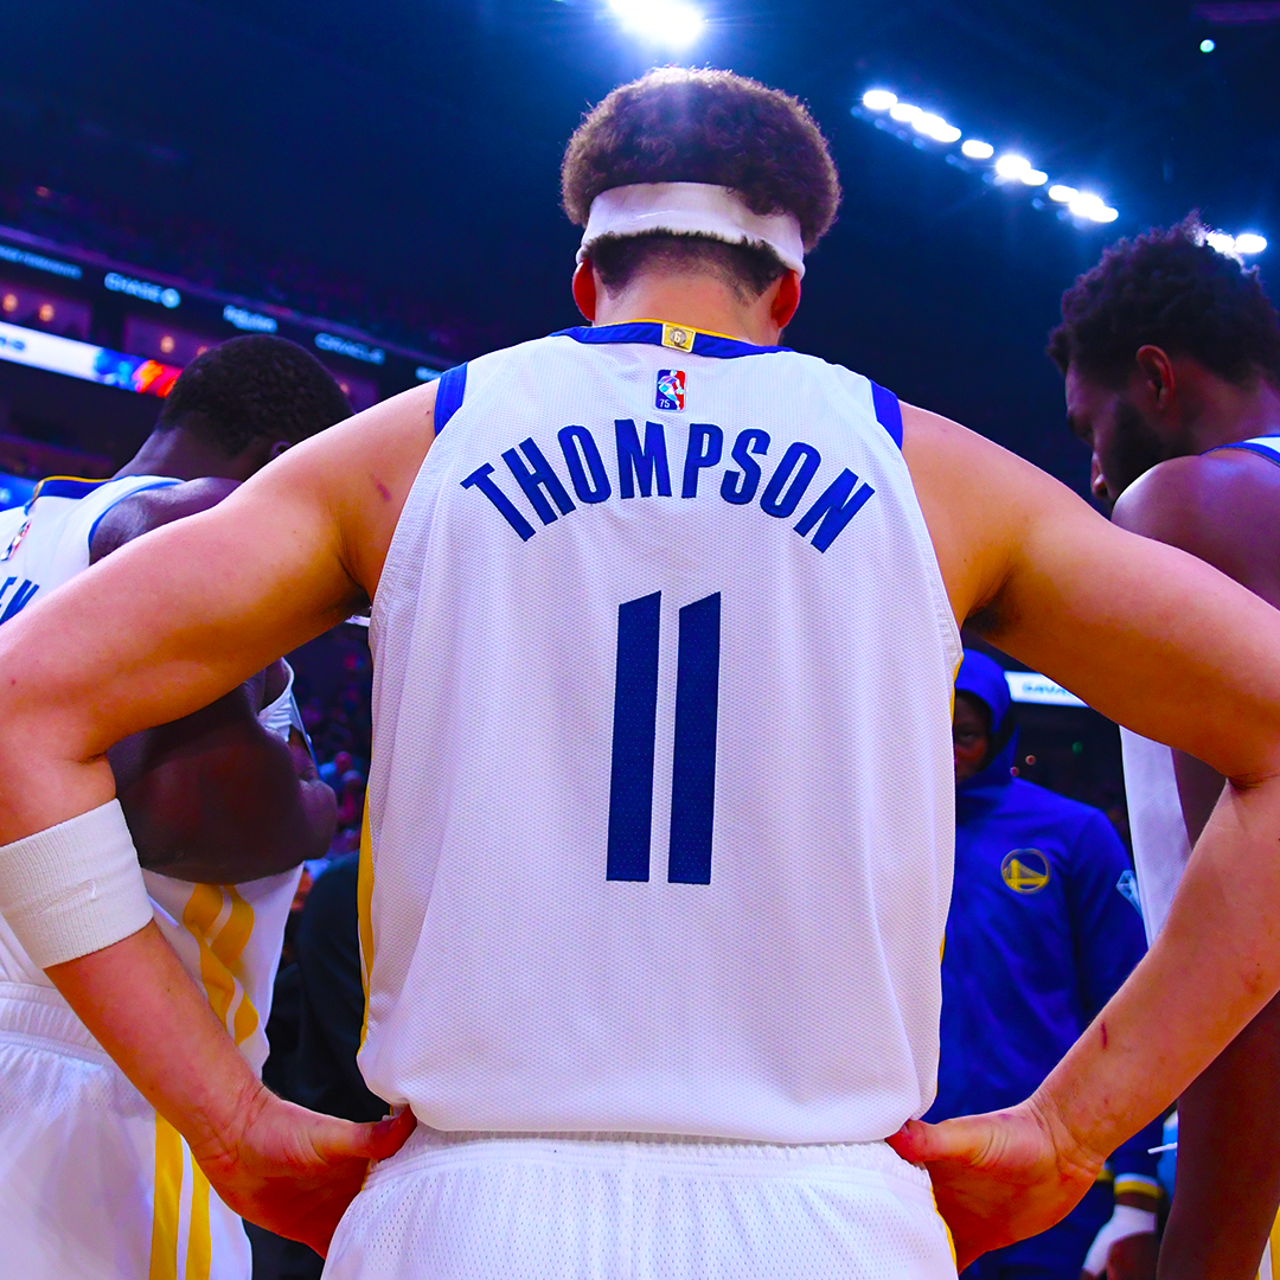 Opinion: Warriors Player Klay Thompson is Missed, but Will be Back